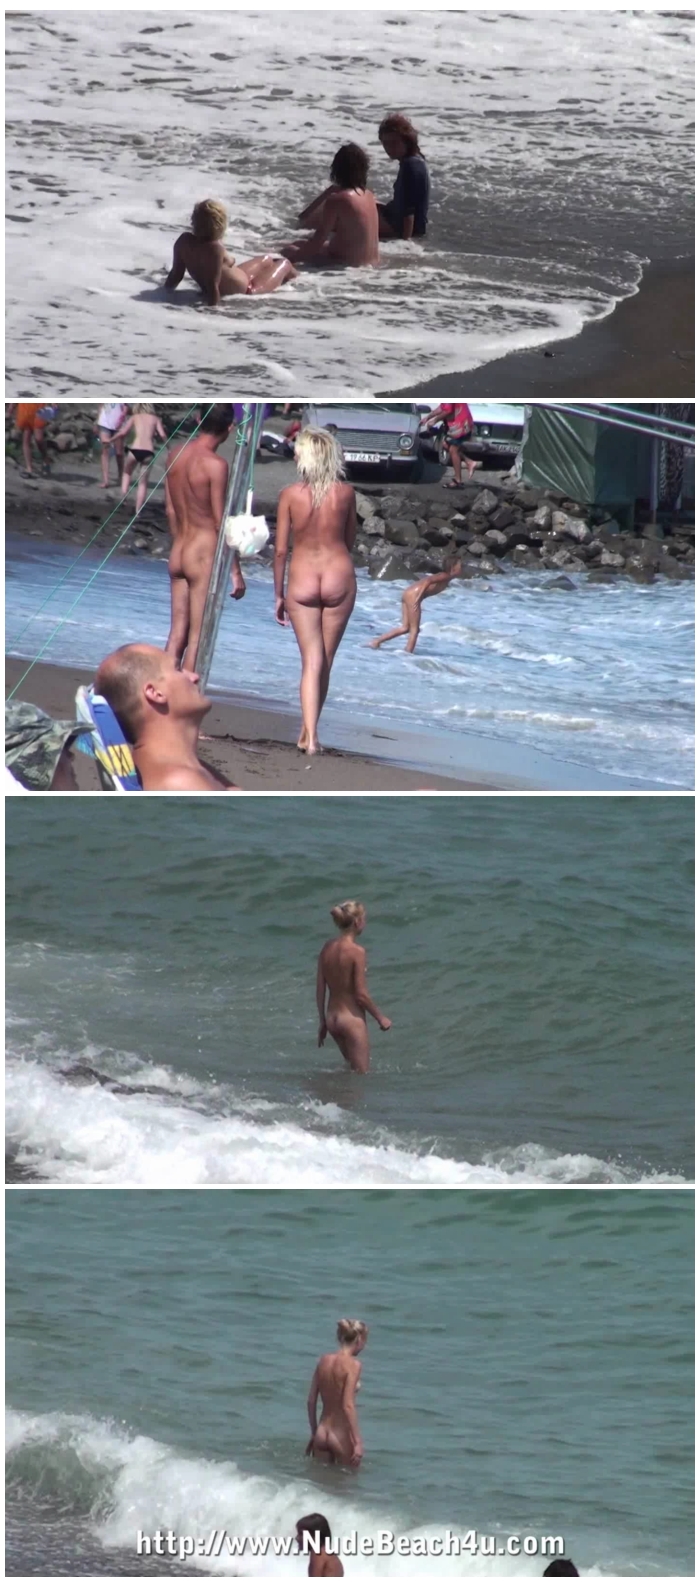 Nude Beach for You - voyeur adult Page 62 Sex-Forum